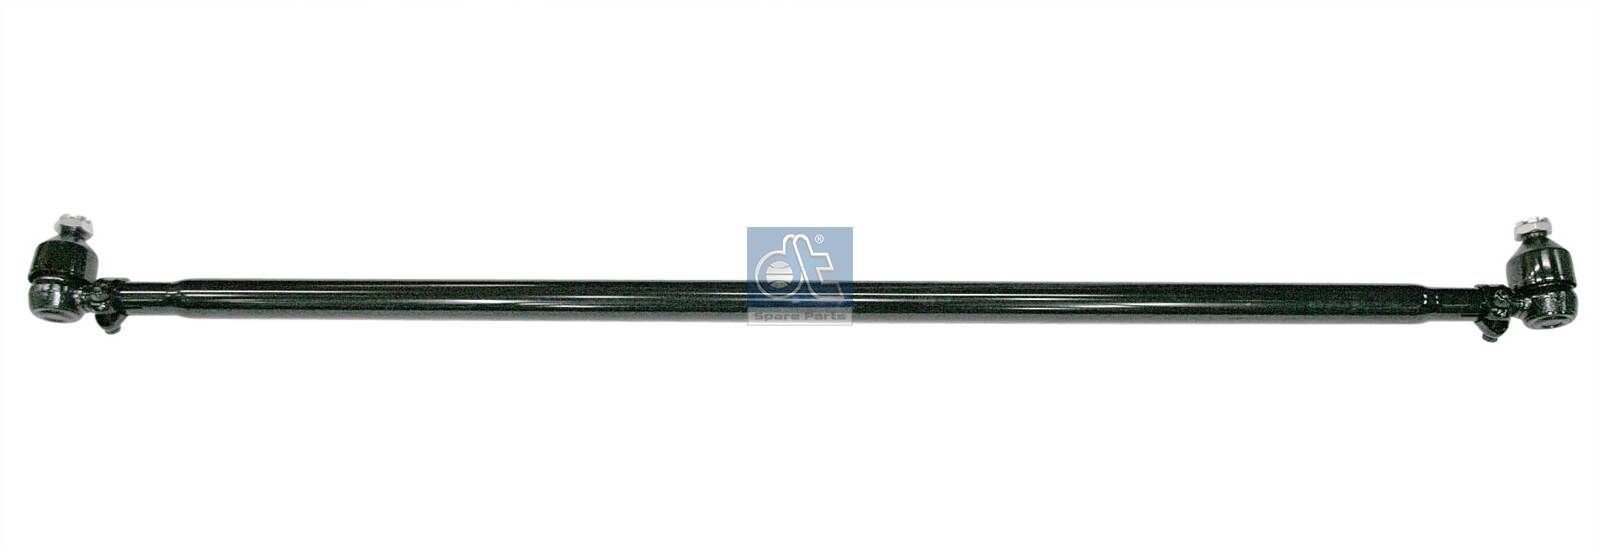 DT Spare Parts 4.63733 Rod Assembly 9413300503